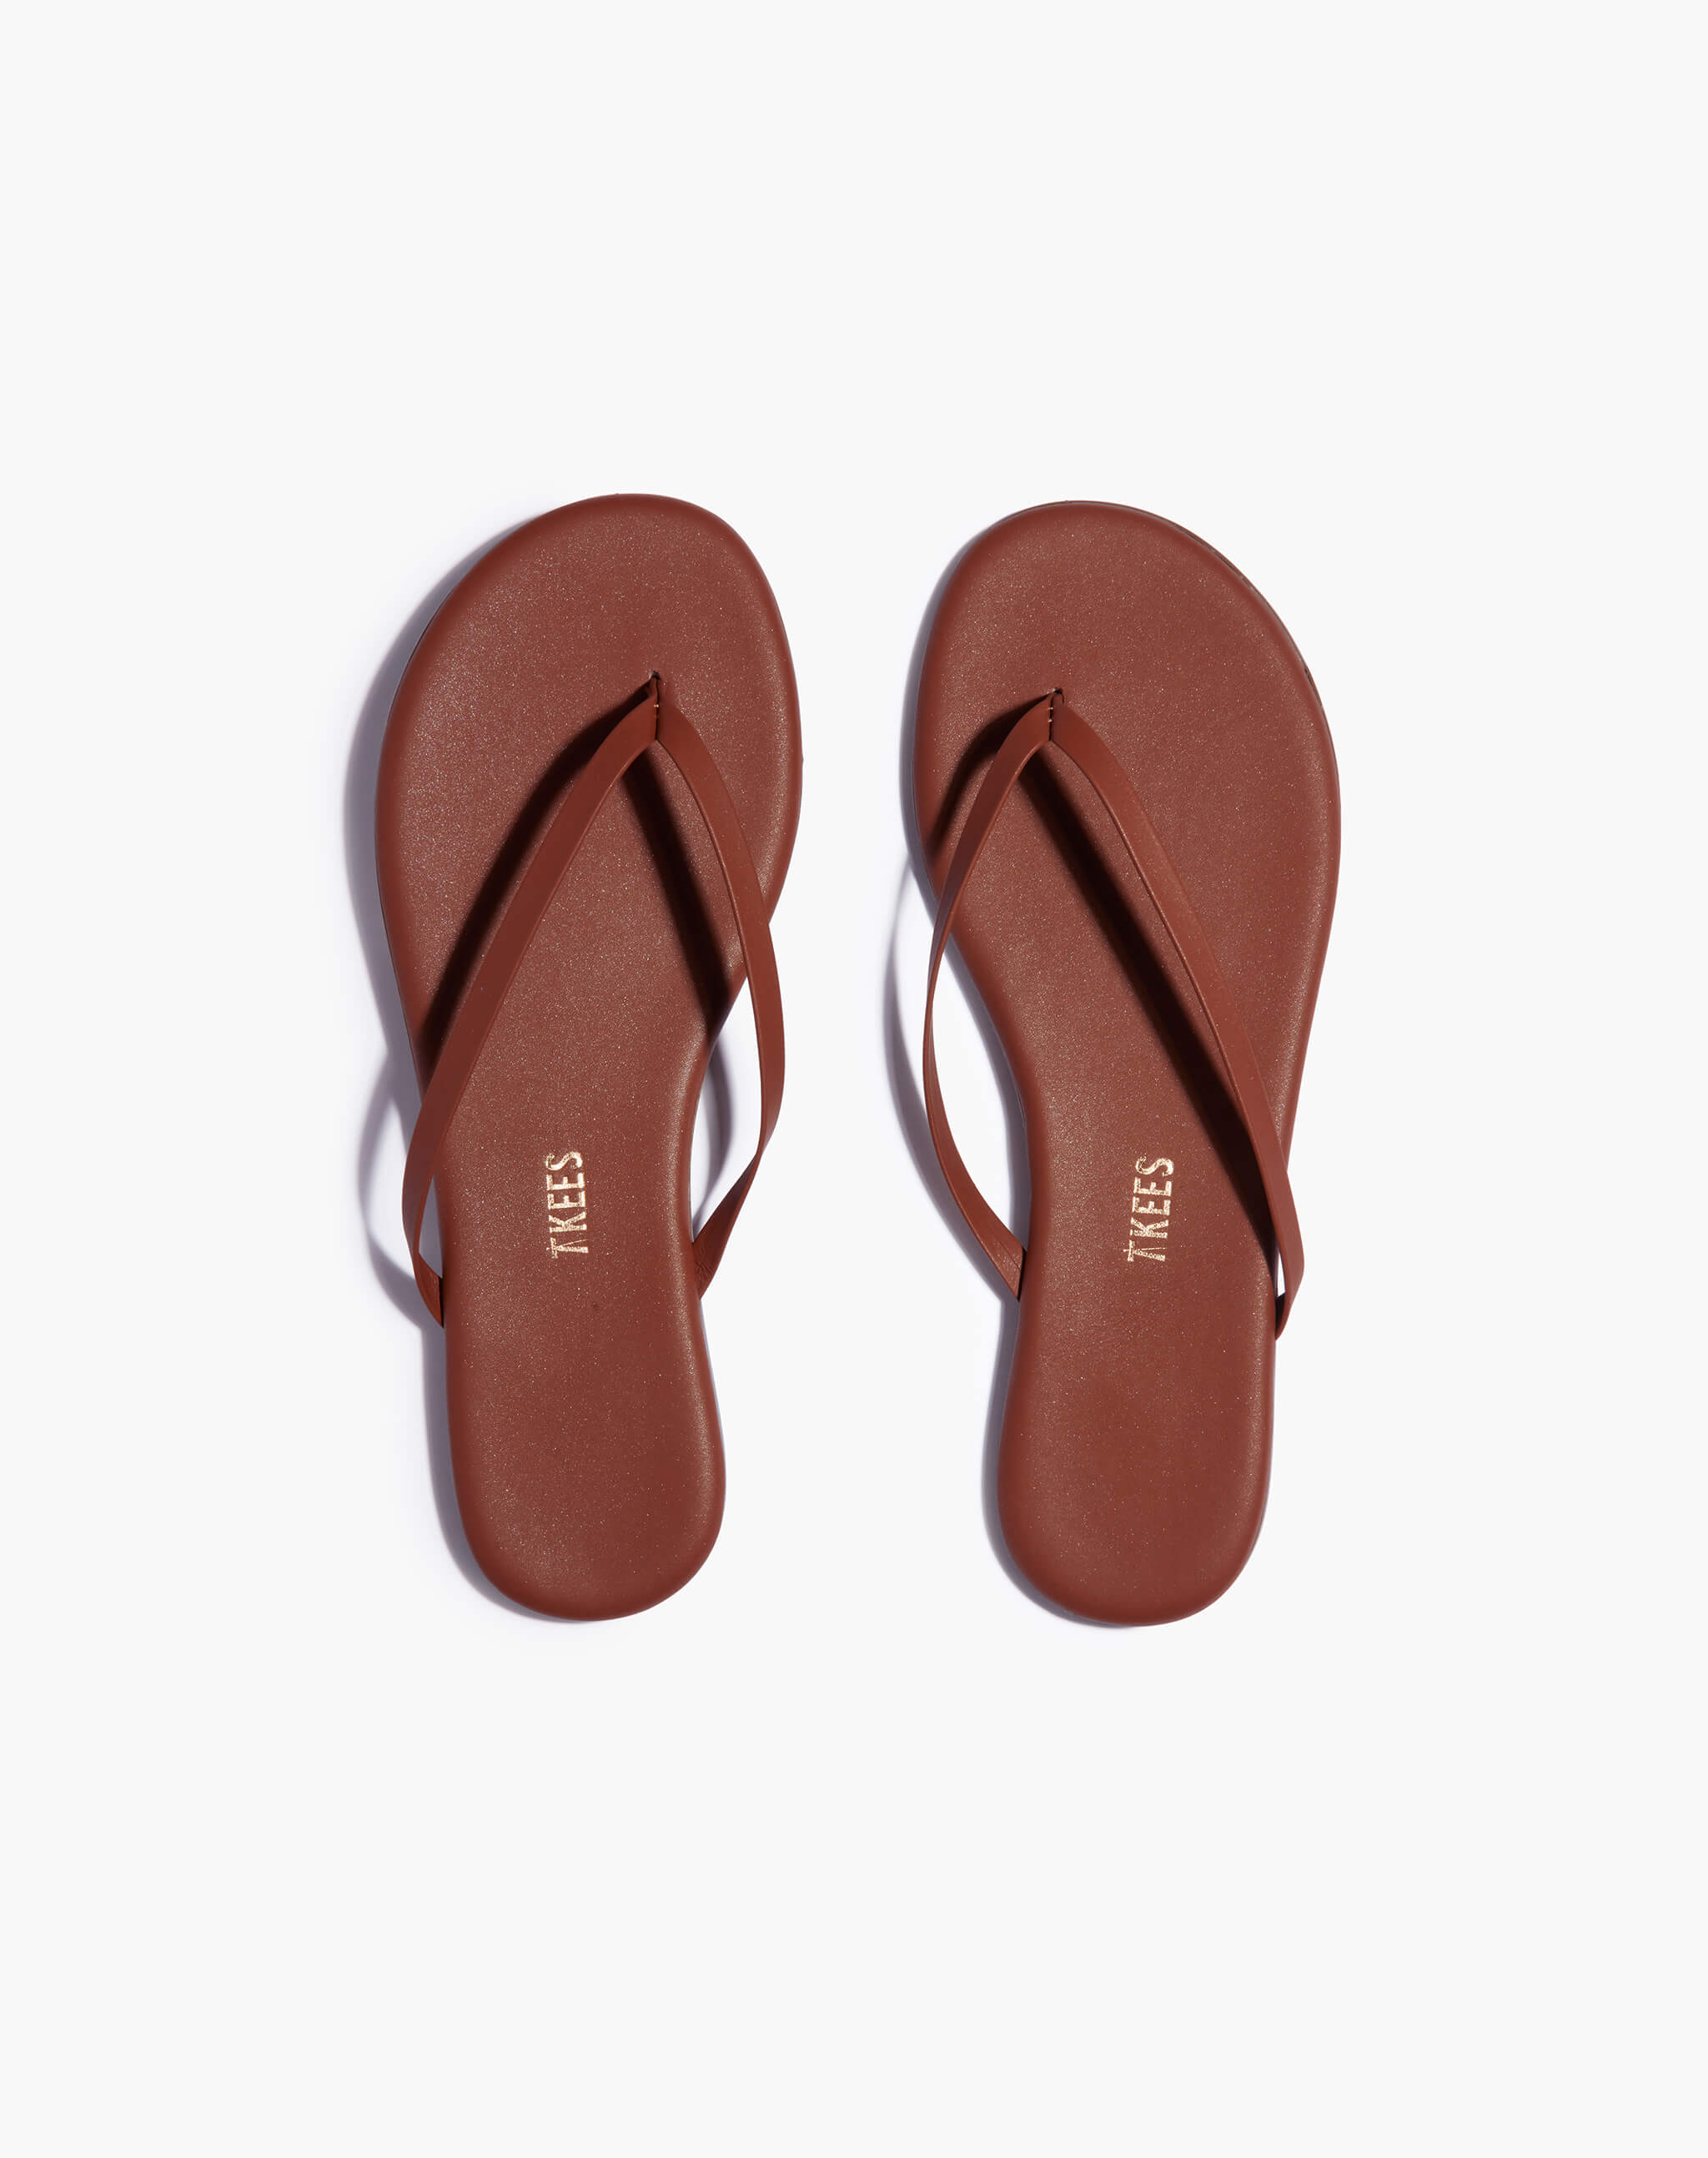 Lily Shimmers in Heatwave | Women's Sandals | TKEES – TKEES